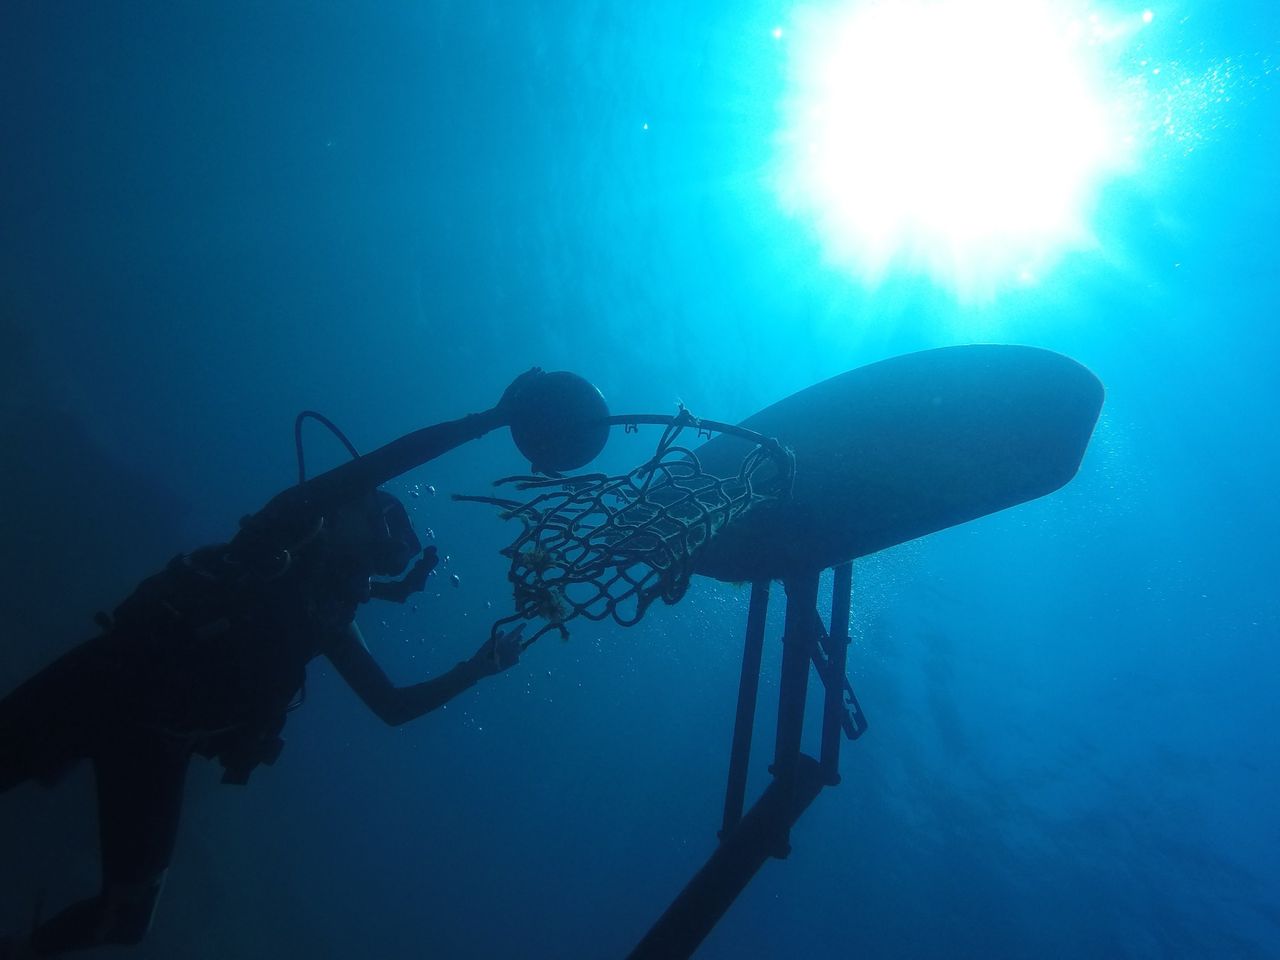 "Underwater Basketball," a photo by 13-year-old Josephine Goldman that won 2nd place in the National Geographic contest.